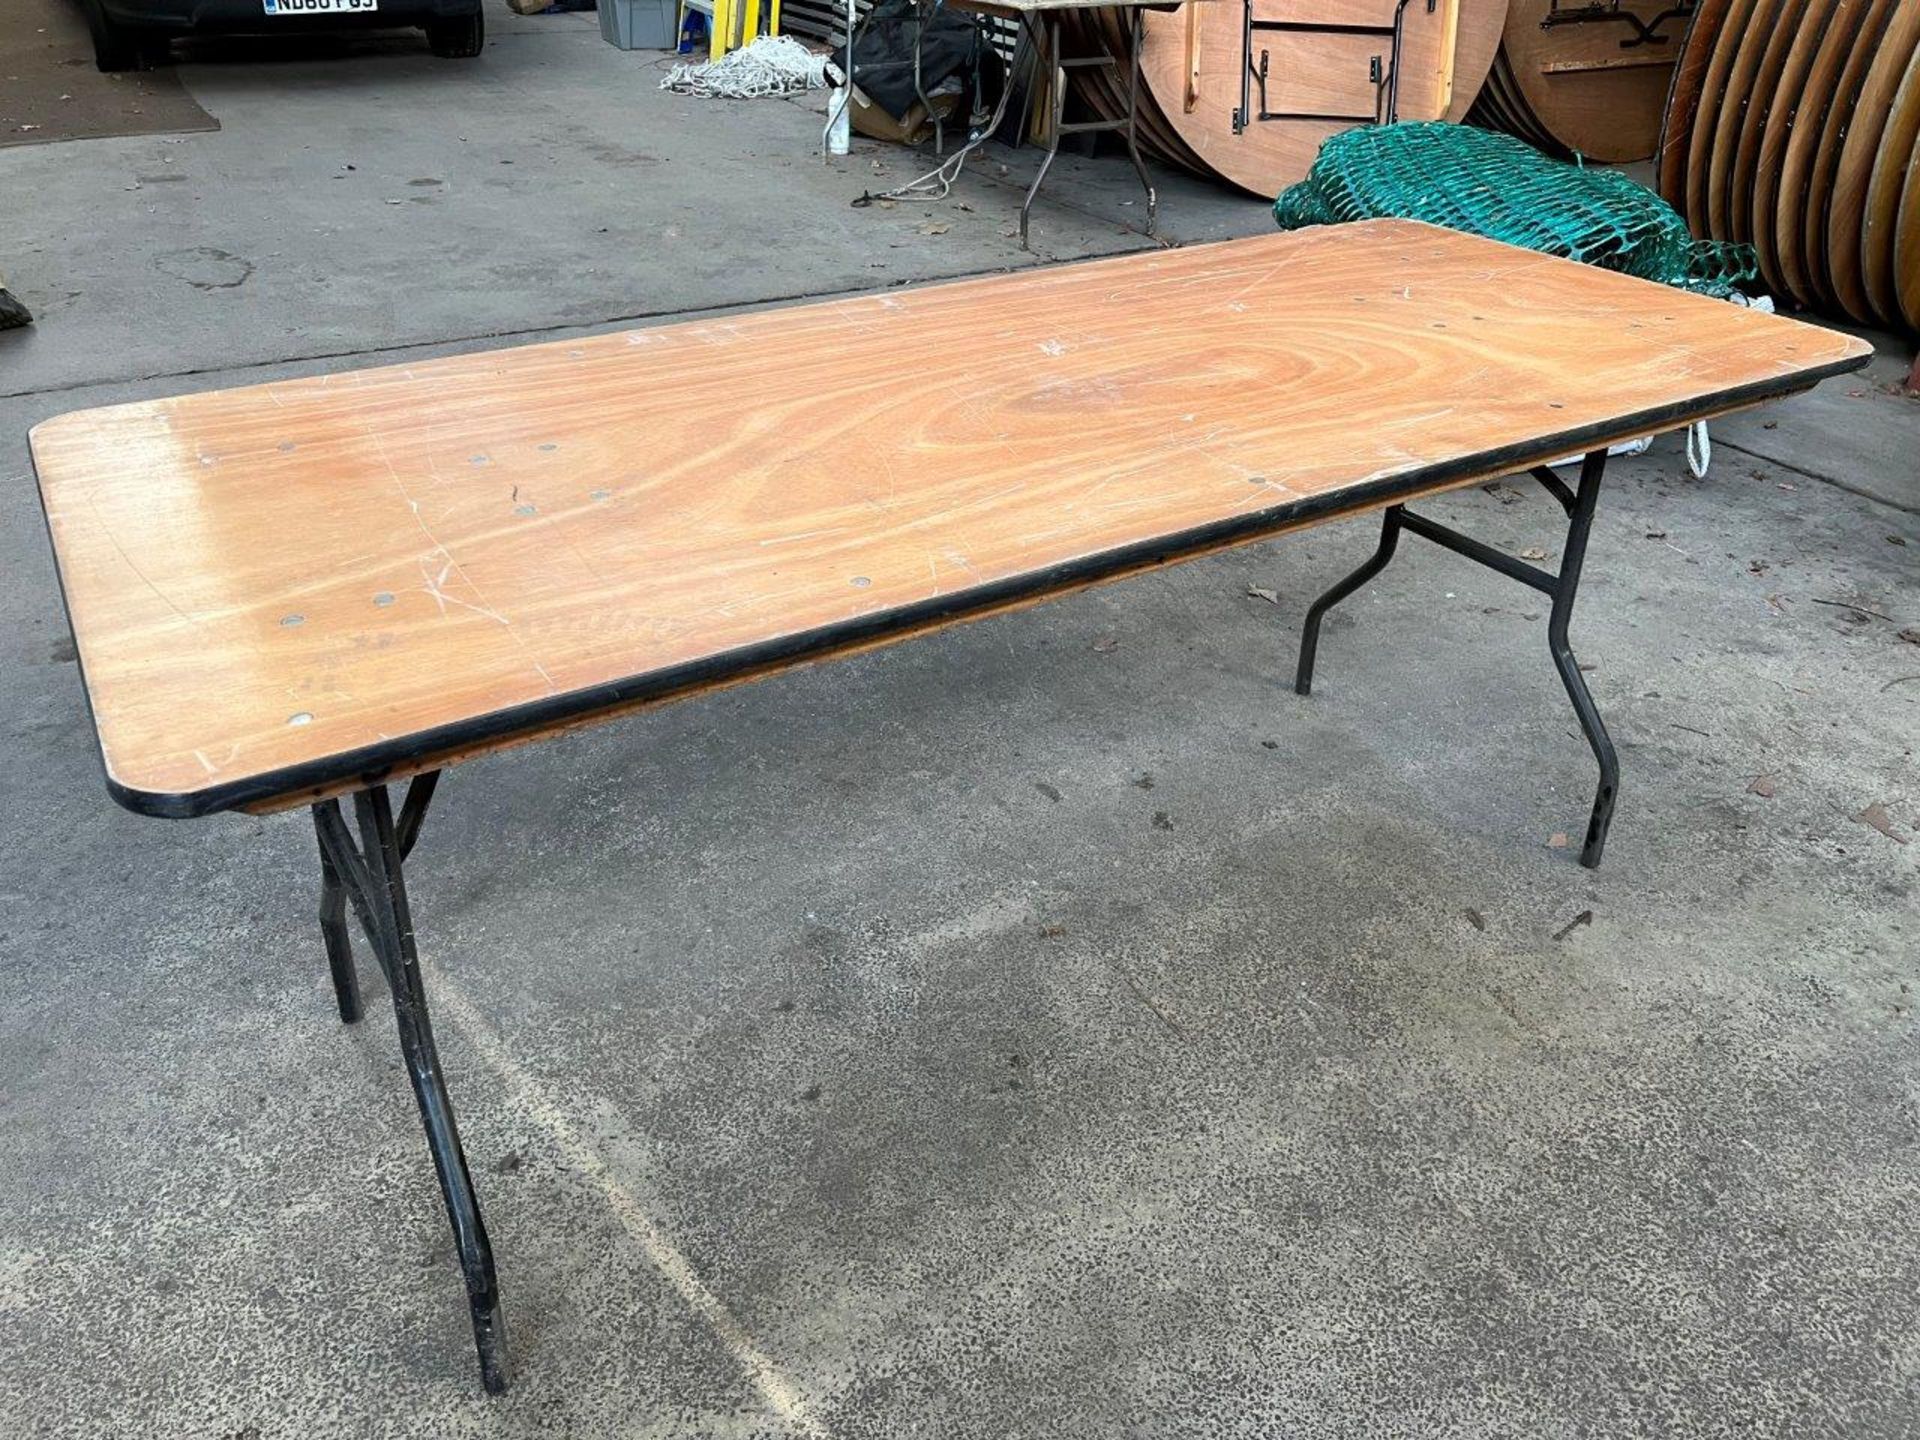 22 no 6ft trestle tables with metal folding legs and plywood top. This lot is subject to VAT.